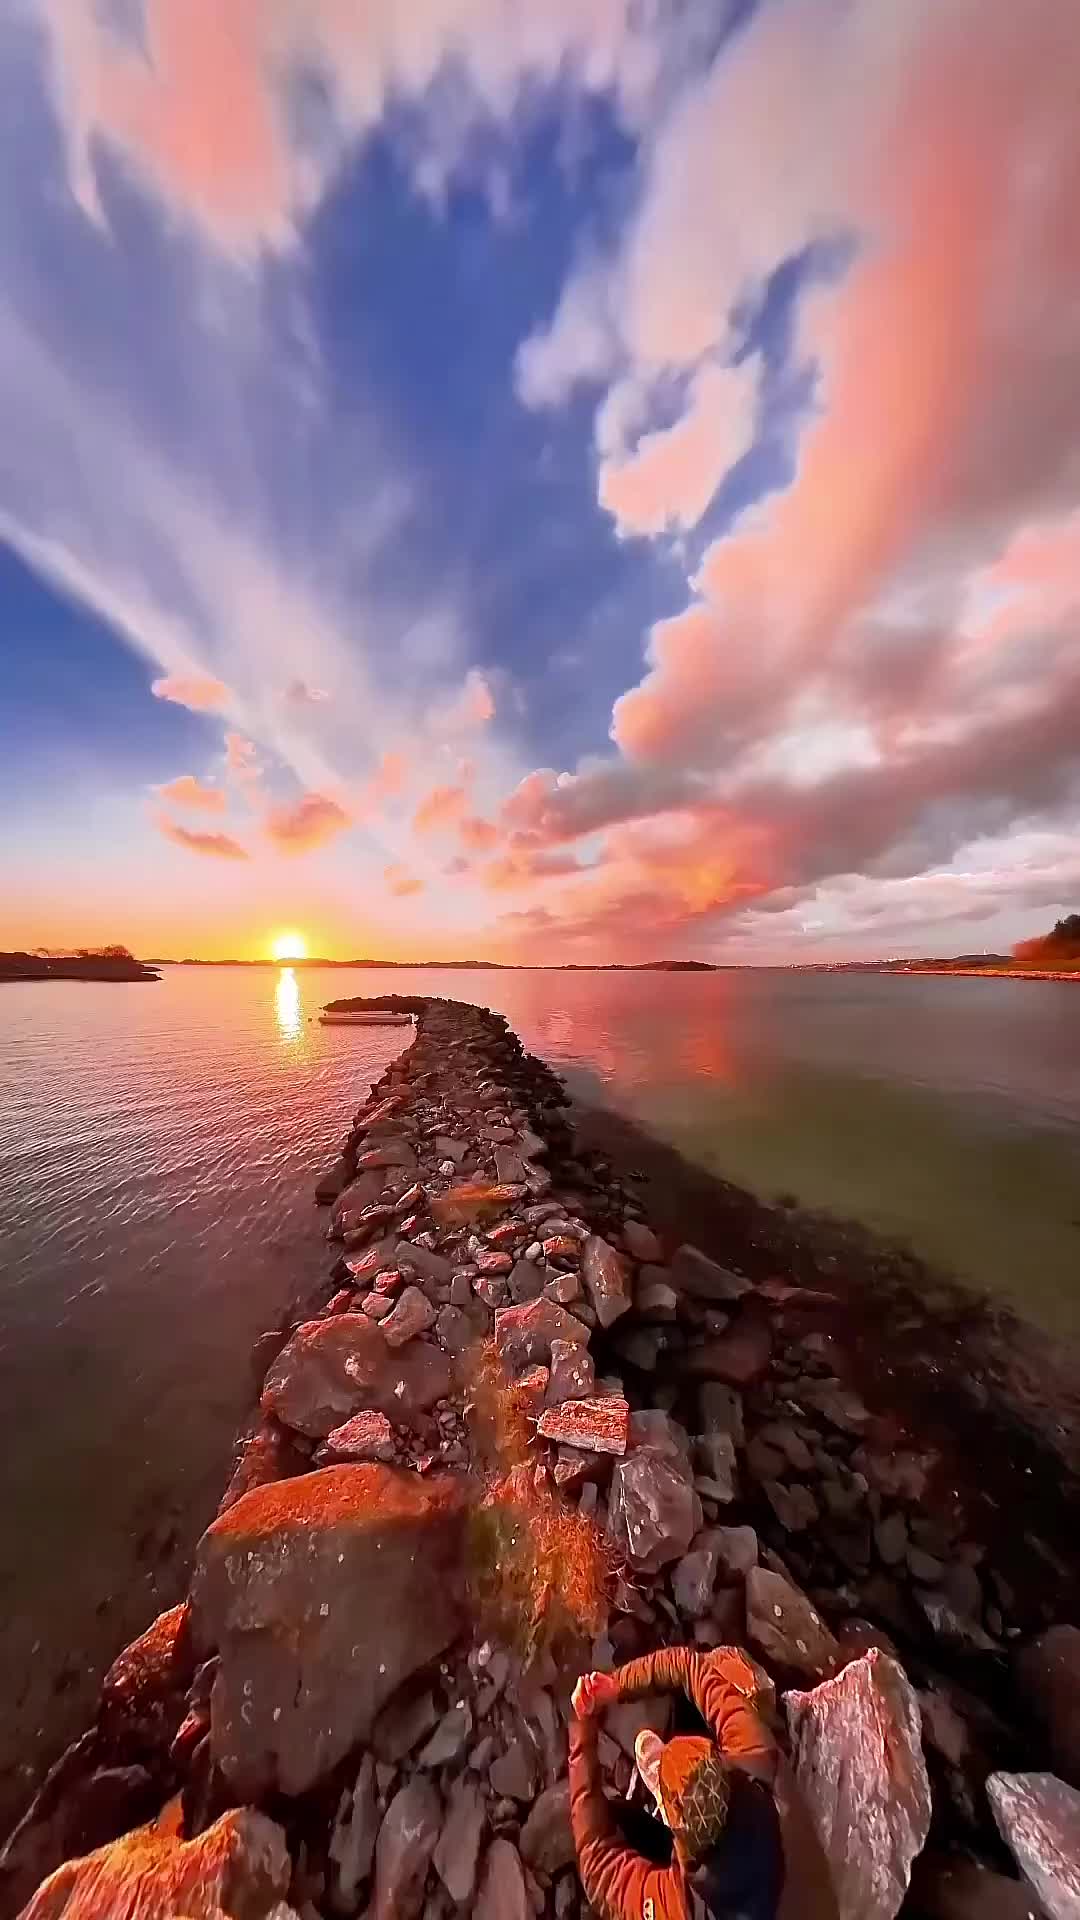 Stunning Sola, Norway Sunset in 360° - Must Watch!